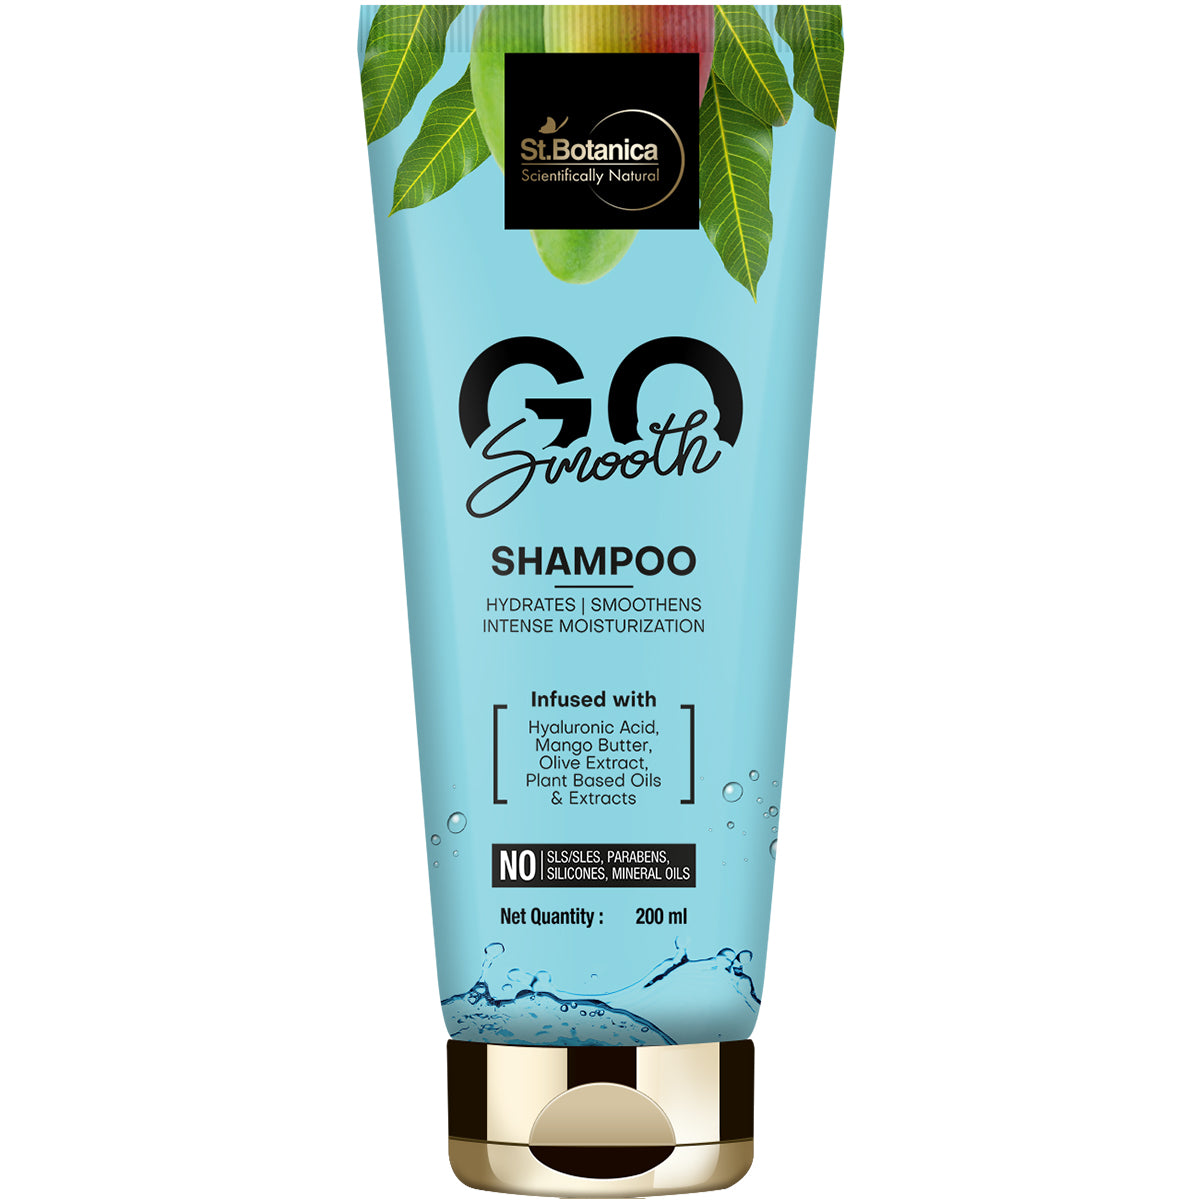 St.Botanica GO Smooth Hair Shampoo - With Hyaluronic Acid, Mango Butter, Olive Extracts, No SLS / Sulphate, Paraben, Silicones, Colors, 200 ml